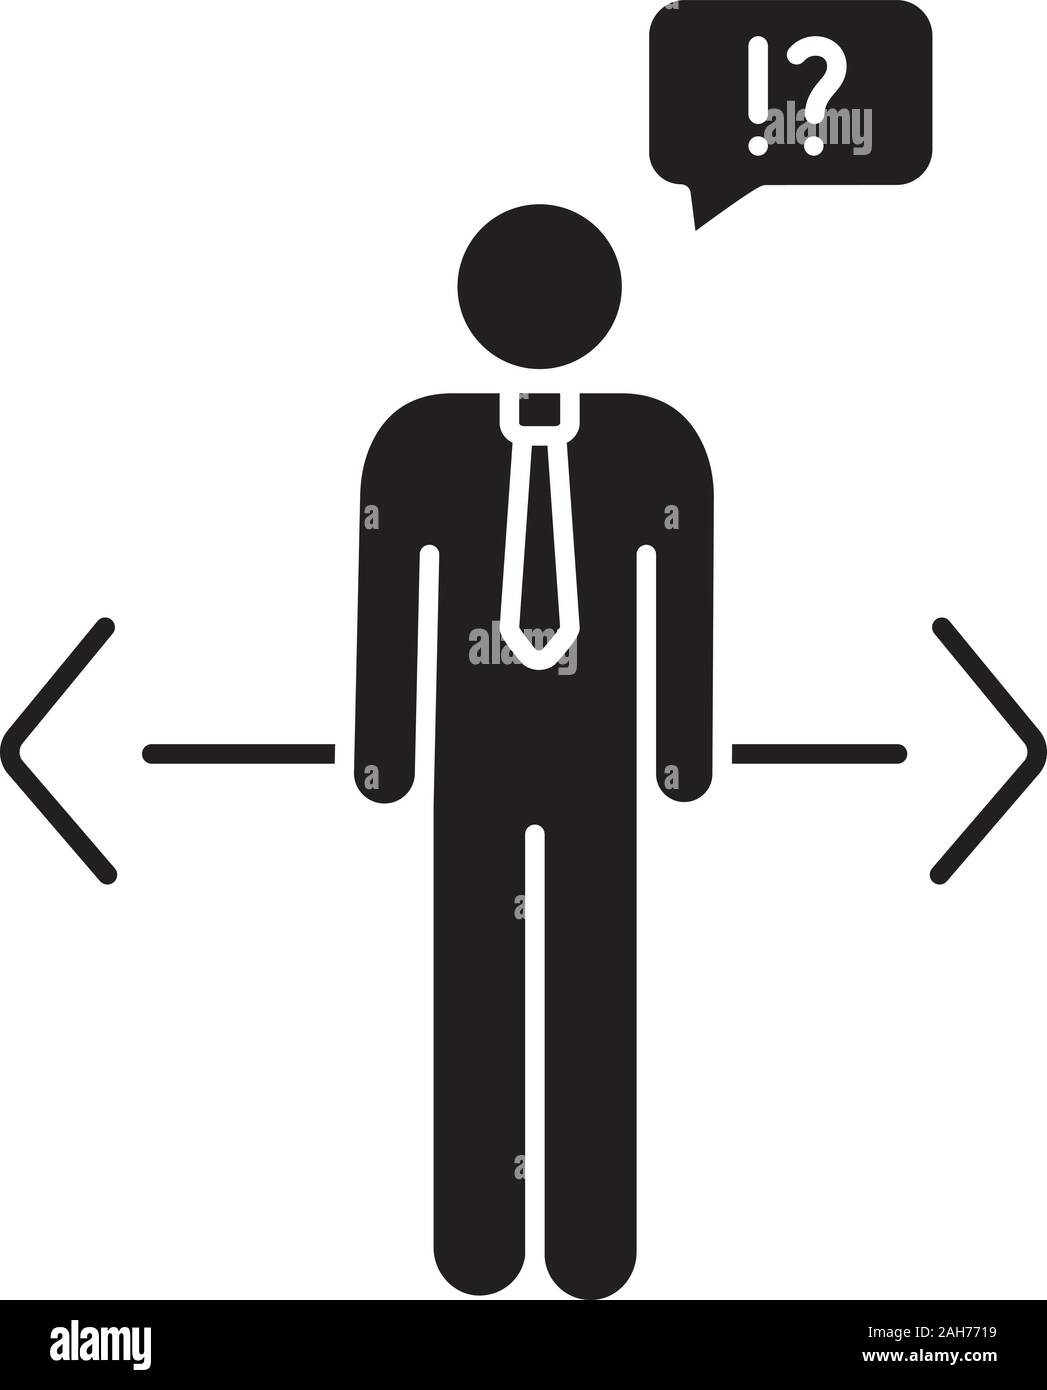 Making choice glyph icon. Decision management. Ethical dilemma. Job opportunities. Confused businessman. Ethical decision. Silhouette symbol. Negative Stock Vector